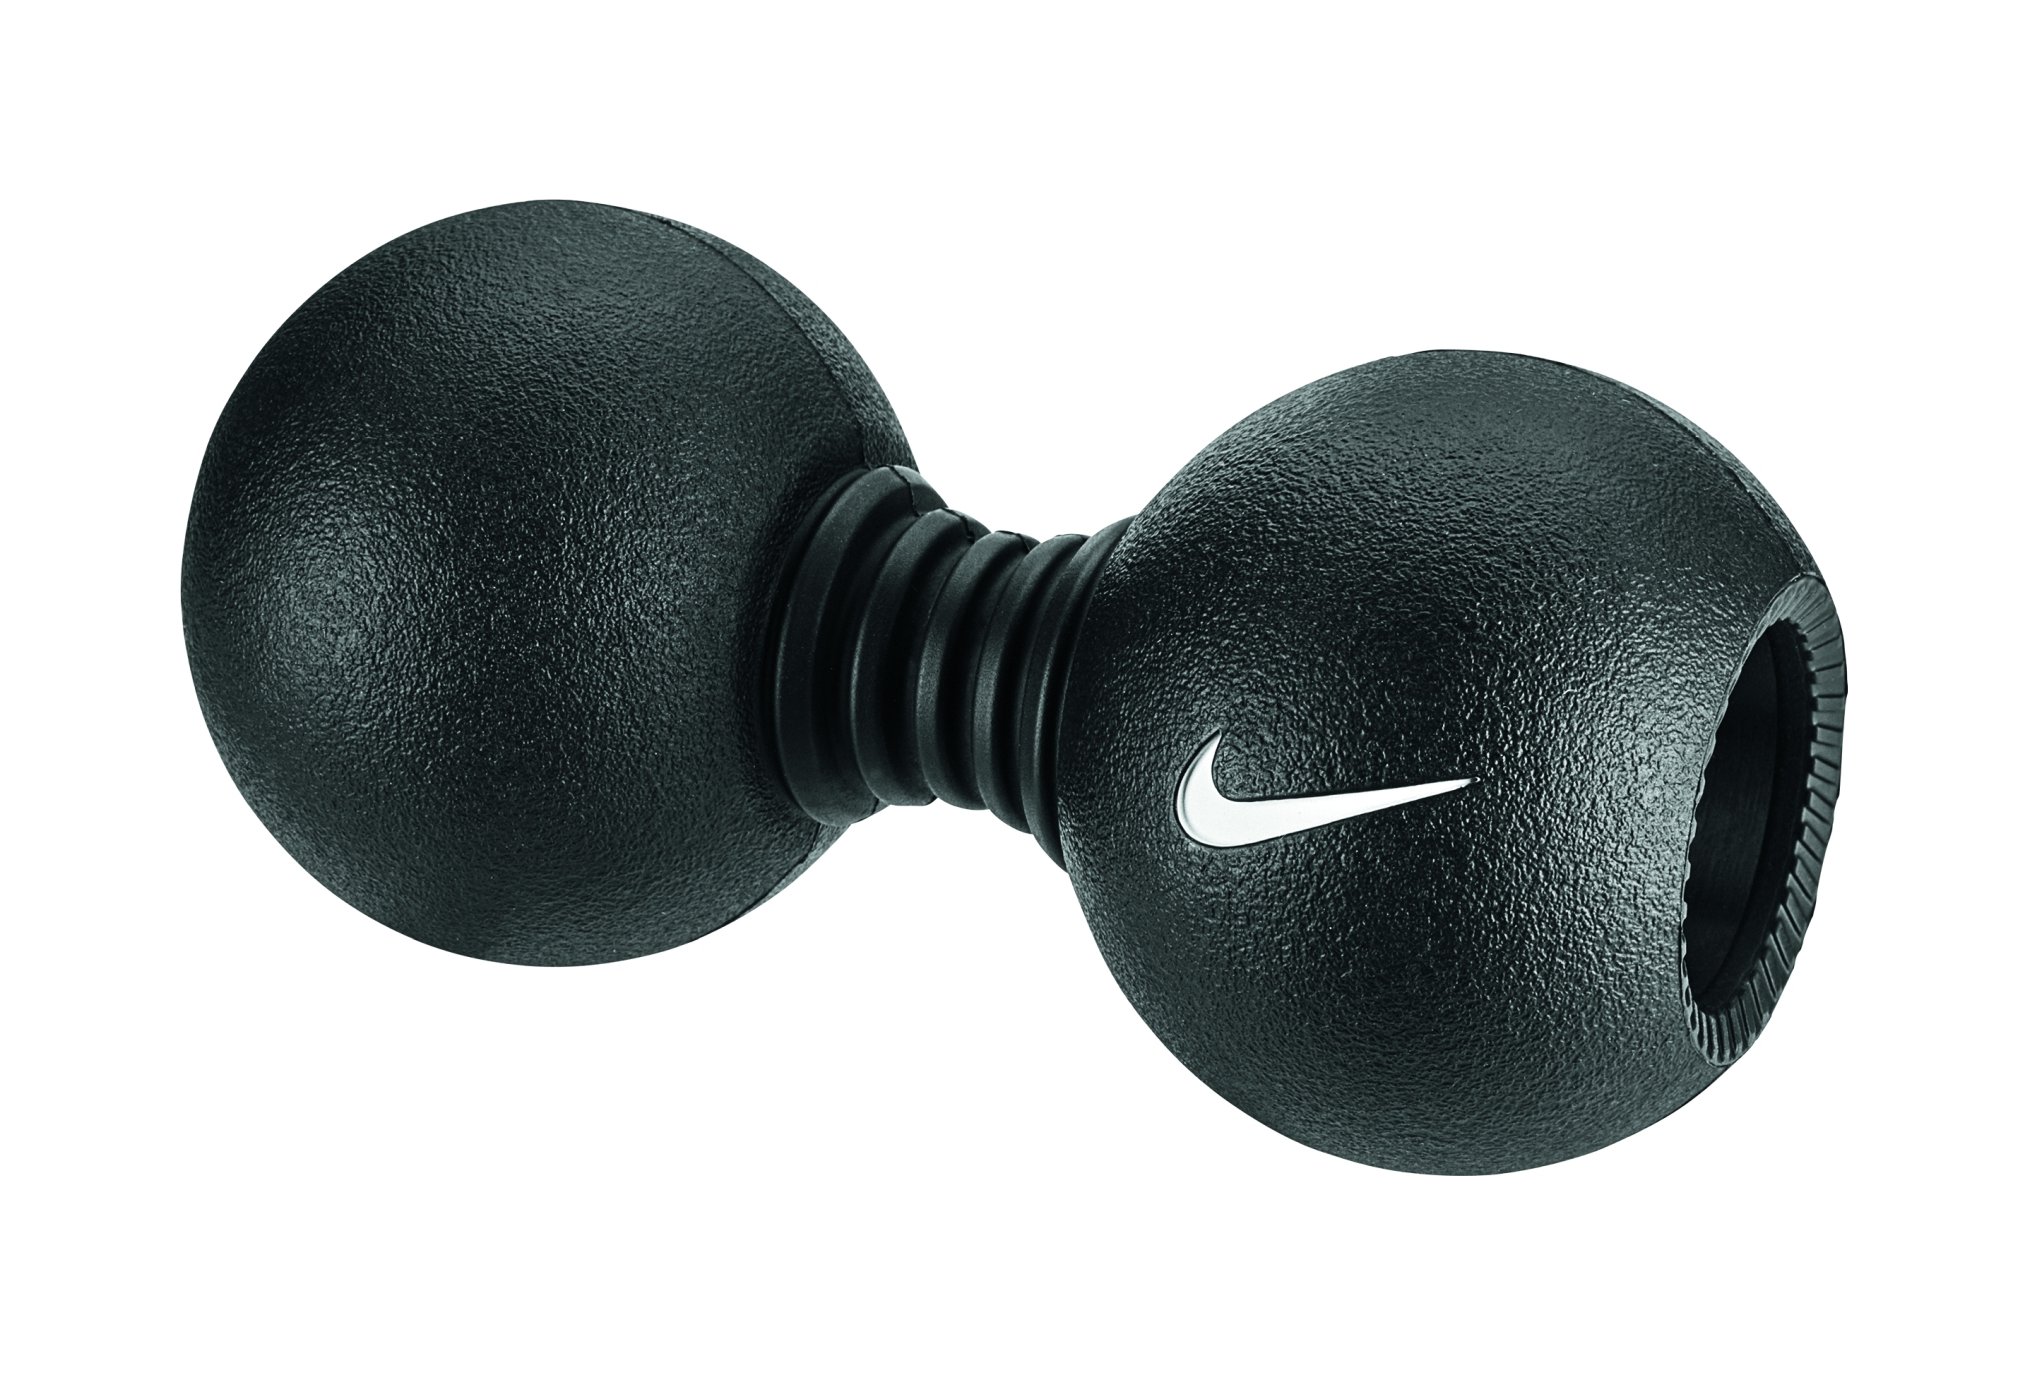 Nike Dual recovery roller training